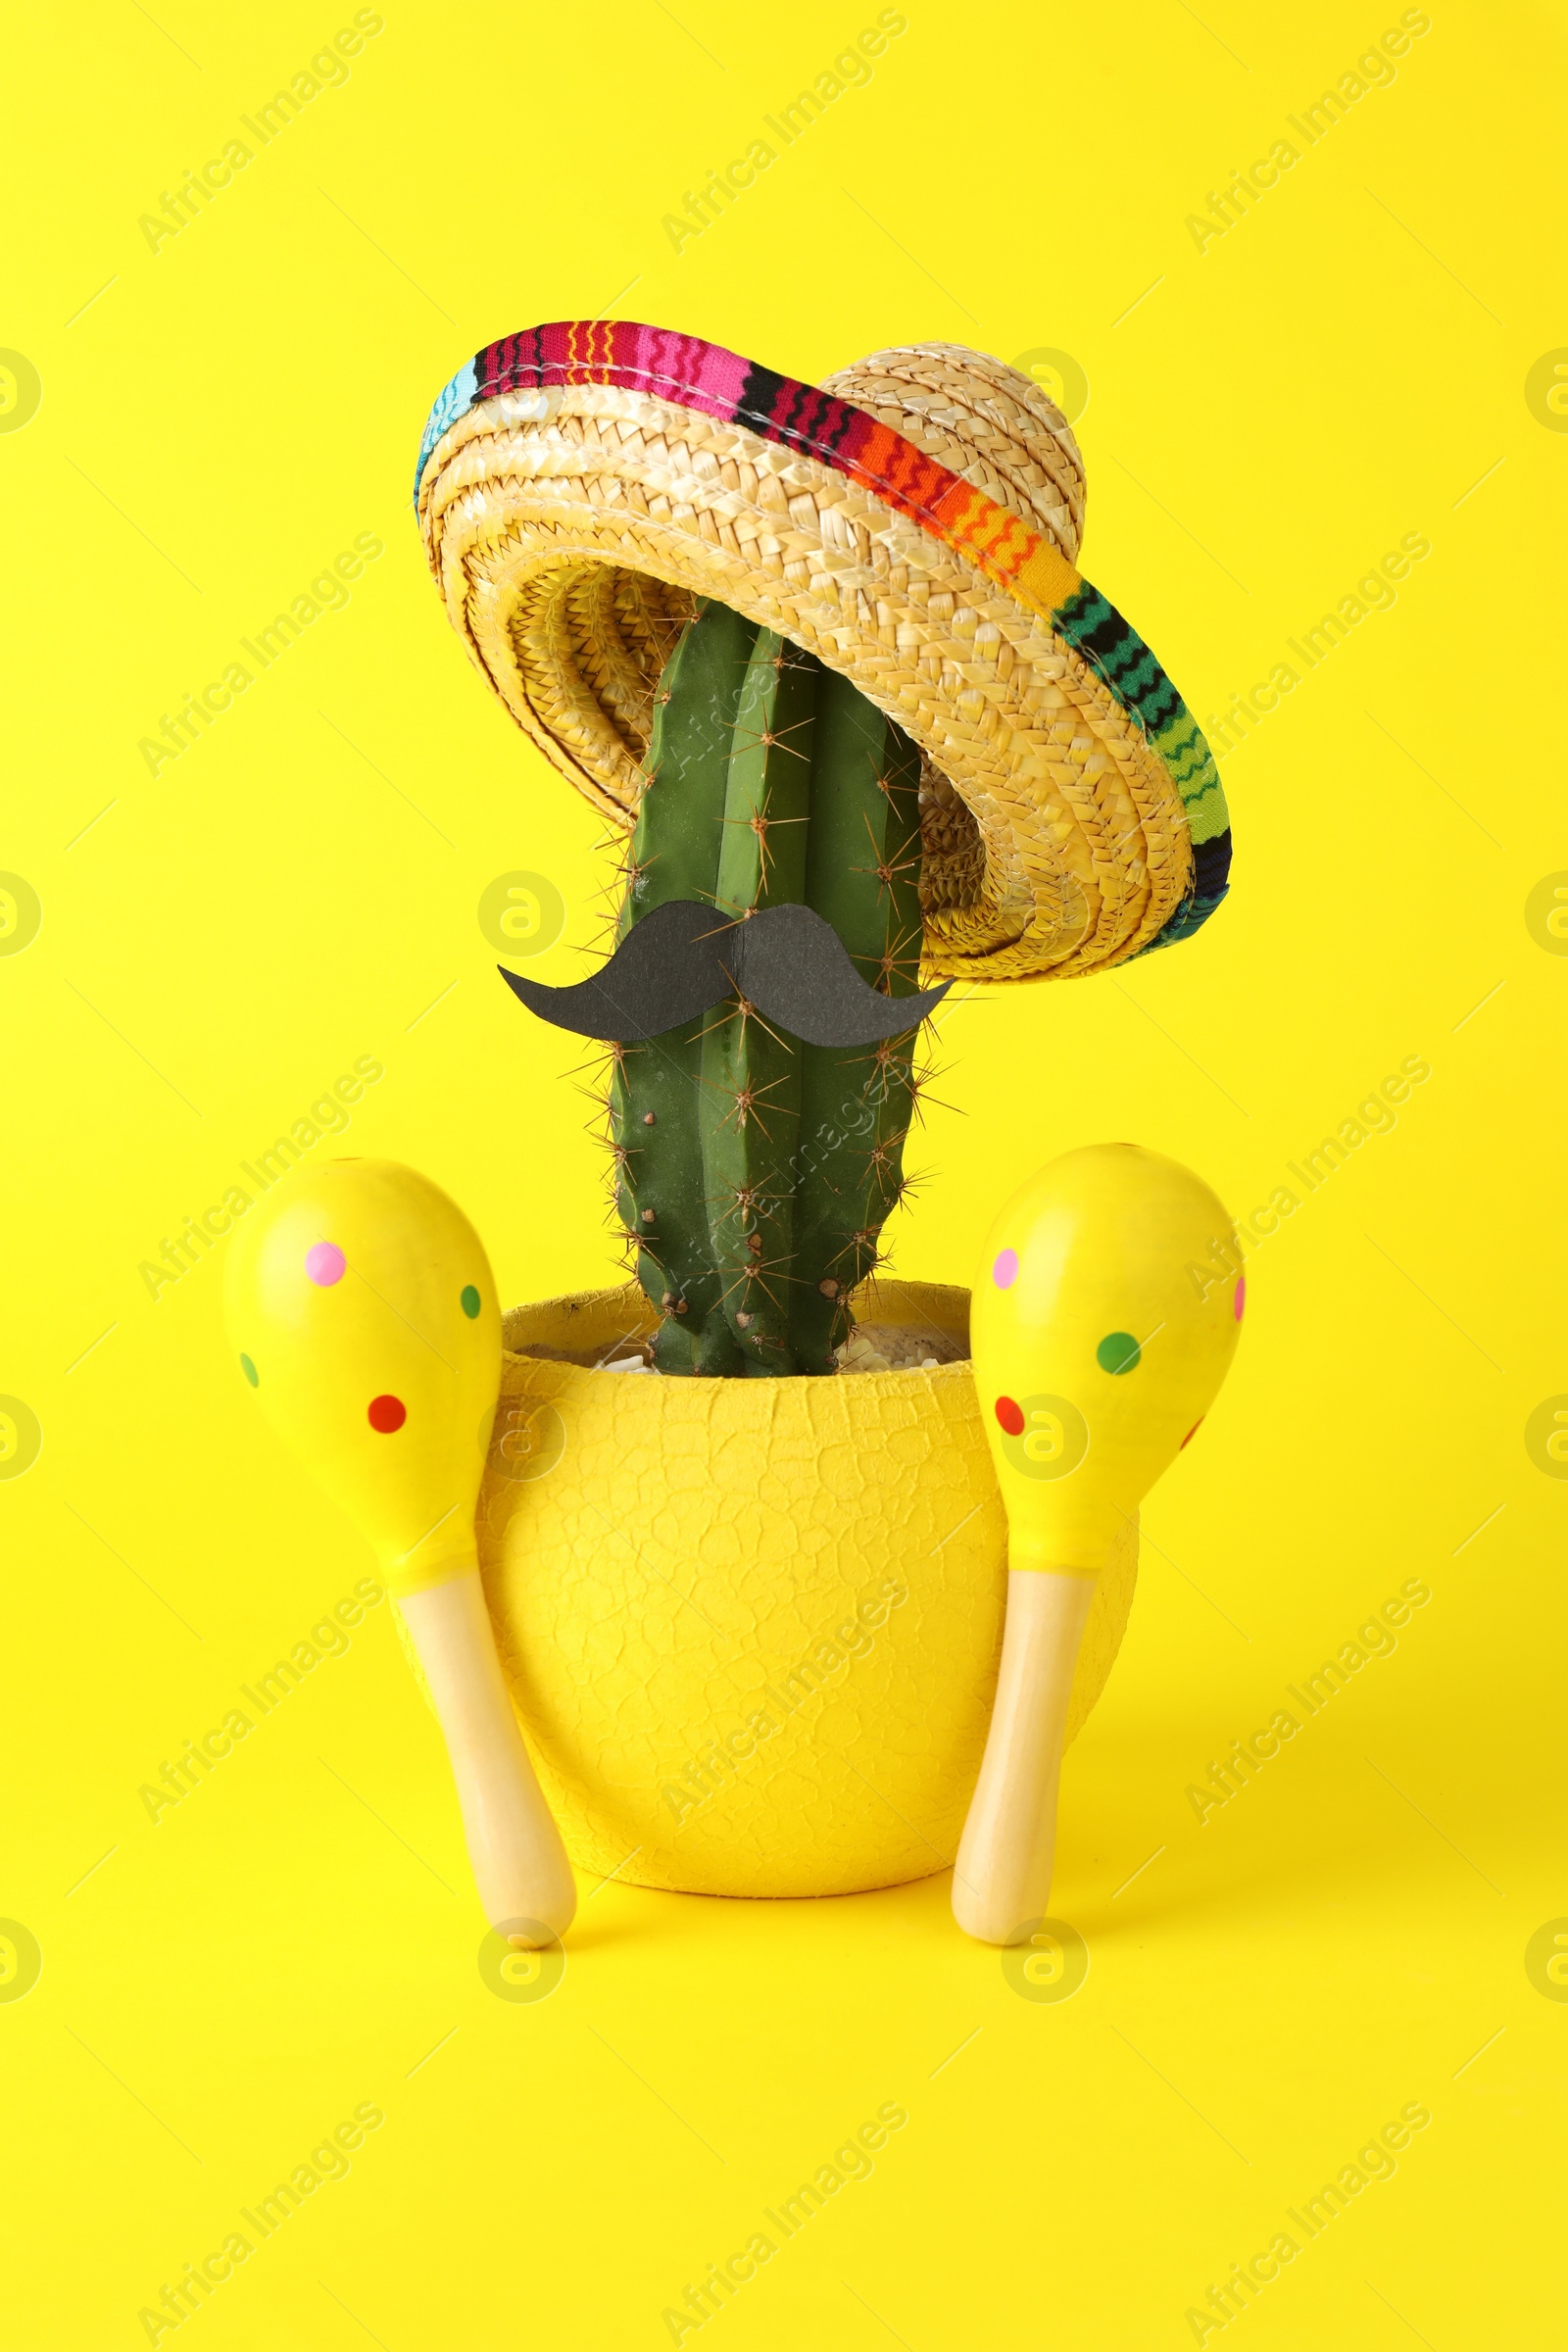 Photo of Cactus with Mexican sombrero hat, fake mustache and maracas on yellow background